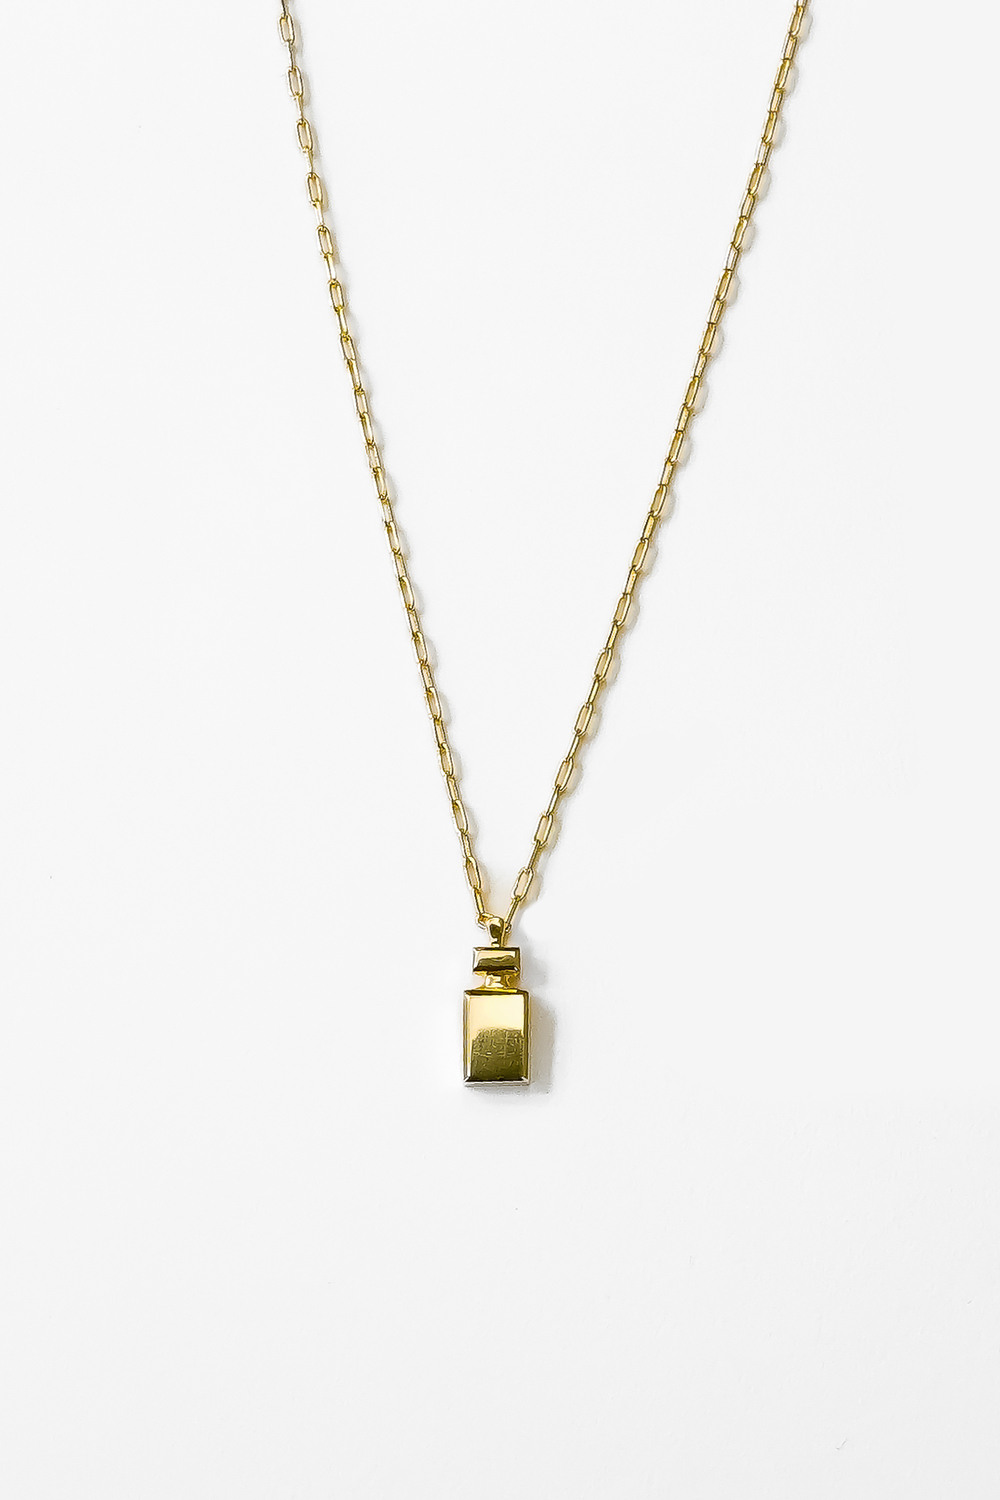 VG_SMALL SQUARE PERFUME NECKLACE1